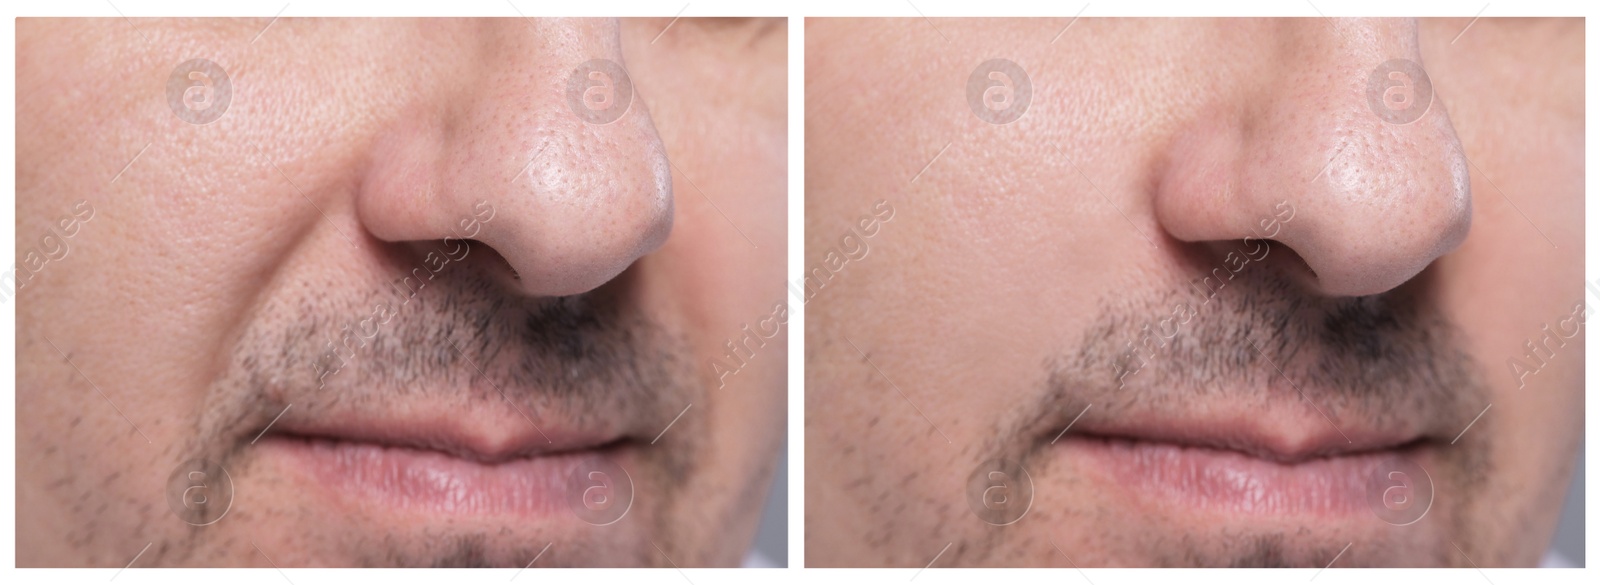 Image of Aging skin changes. Man showing face before and after rejuvenation, closeup. Collage comparing skin condition